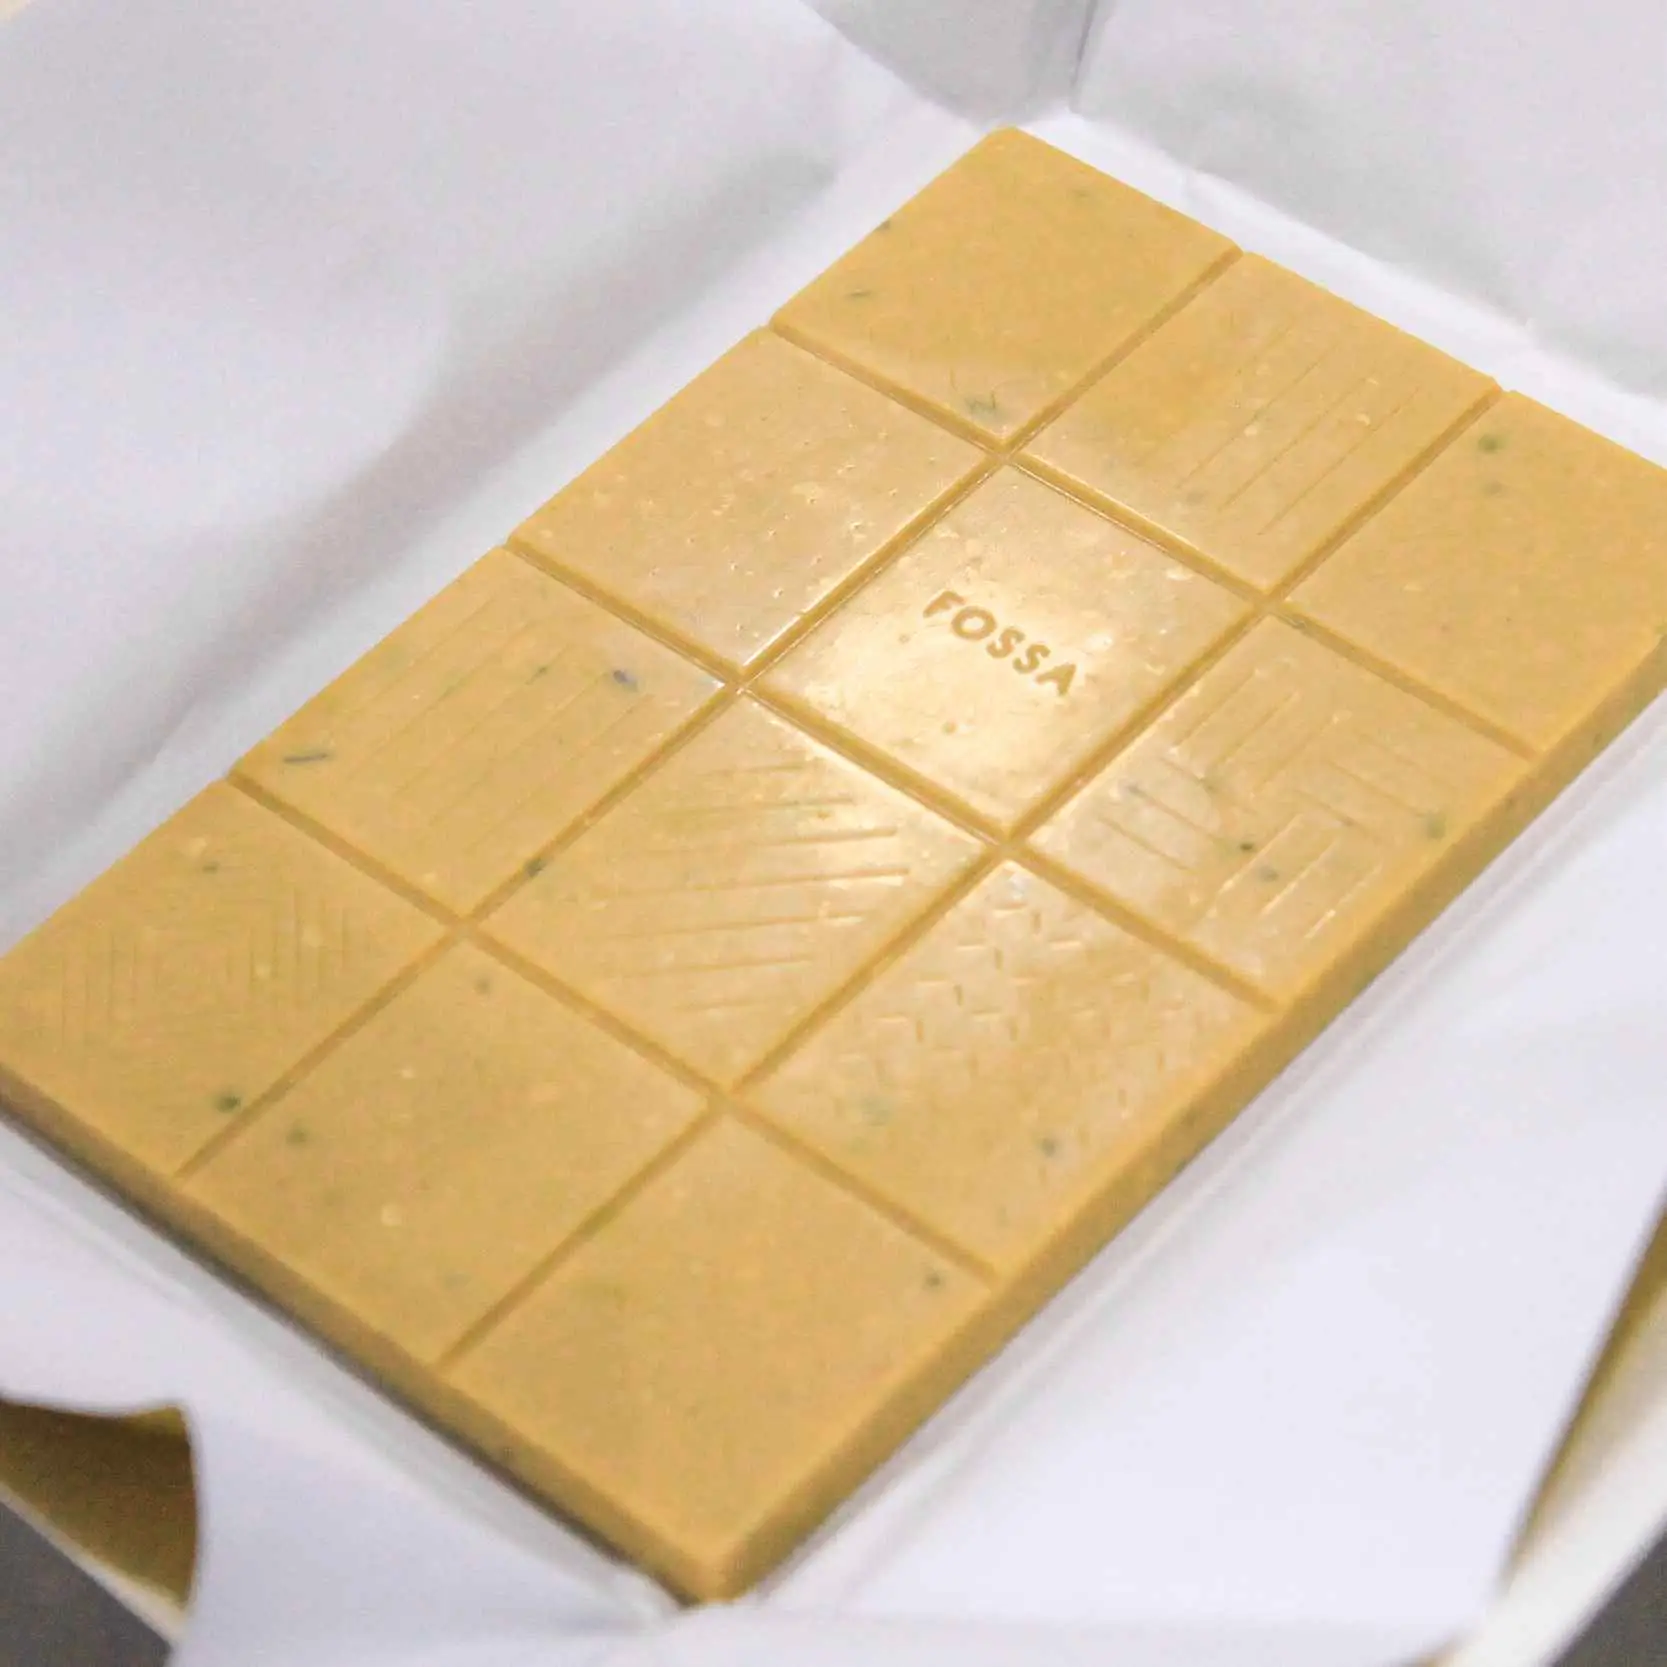 Salted Egg Cereal Blond Chocolate Delivery